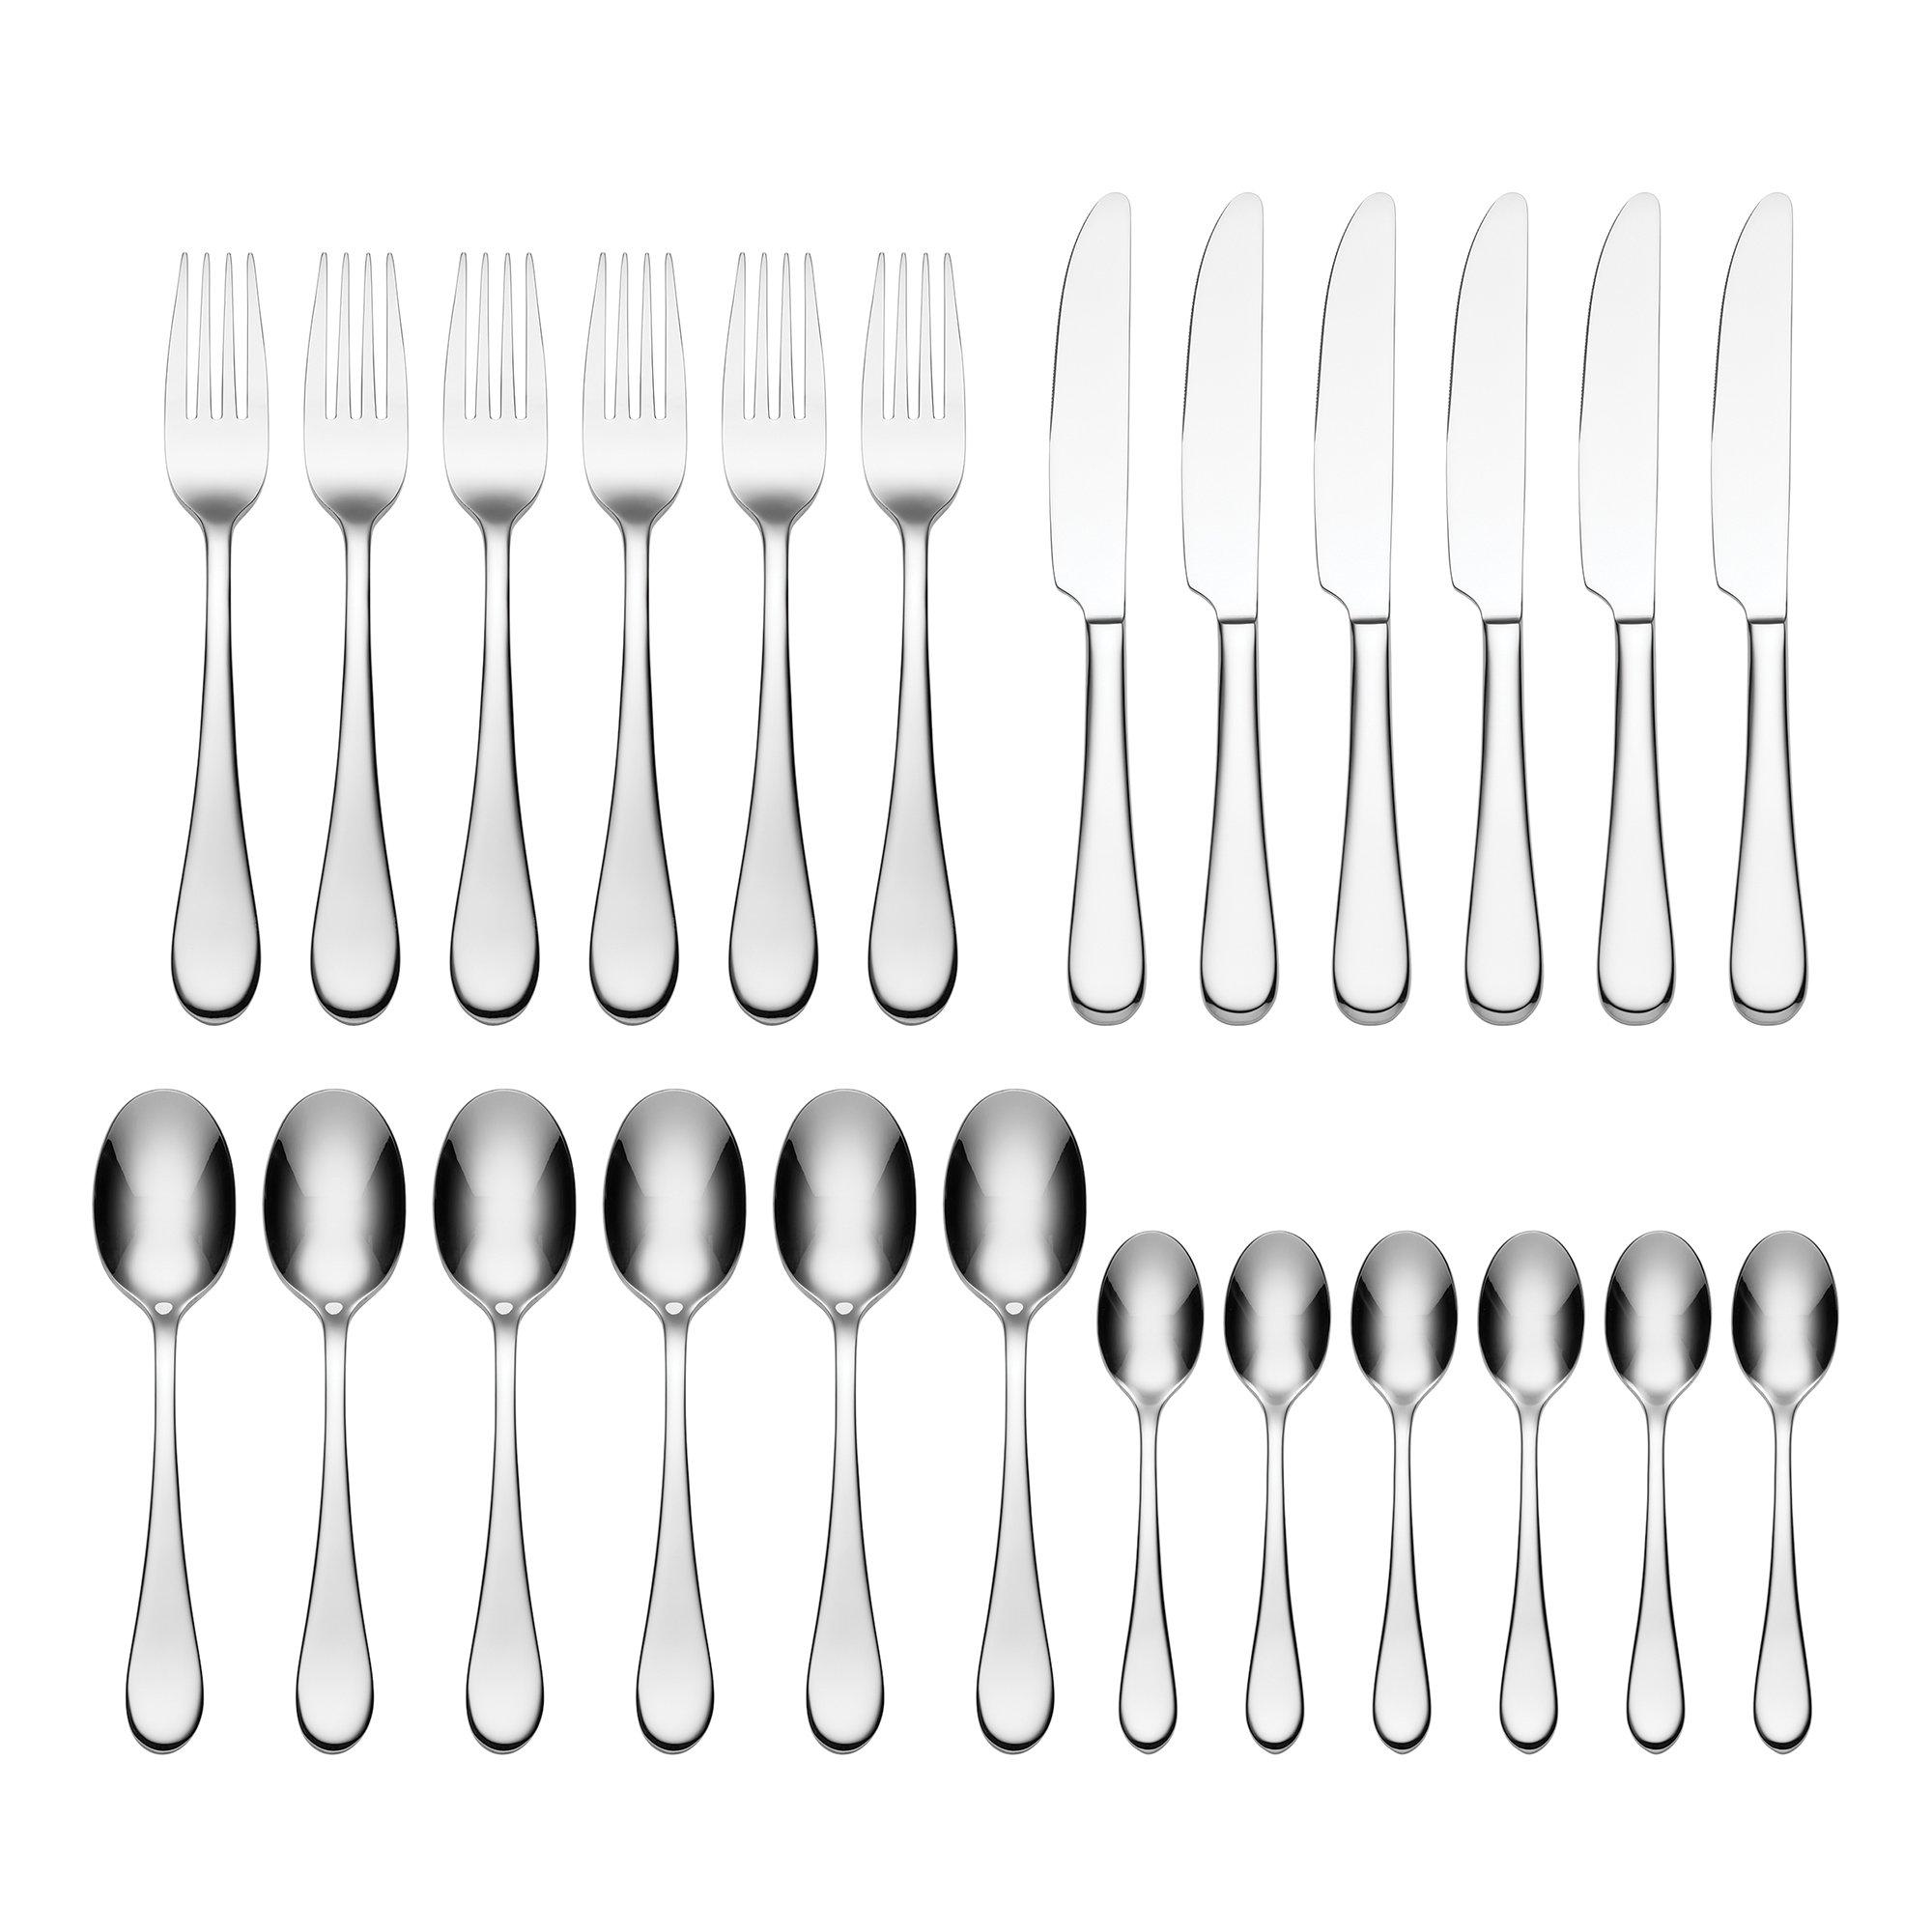 Icarus 24 Piece Culterly Set, Stainless Steel, Rust Resistant, Dishwasher Safe